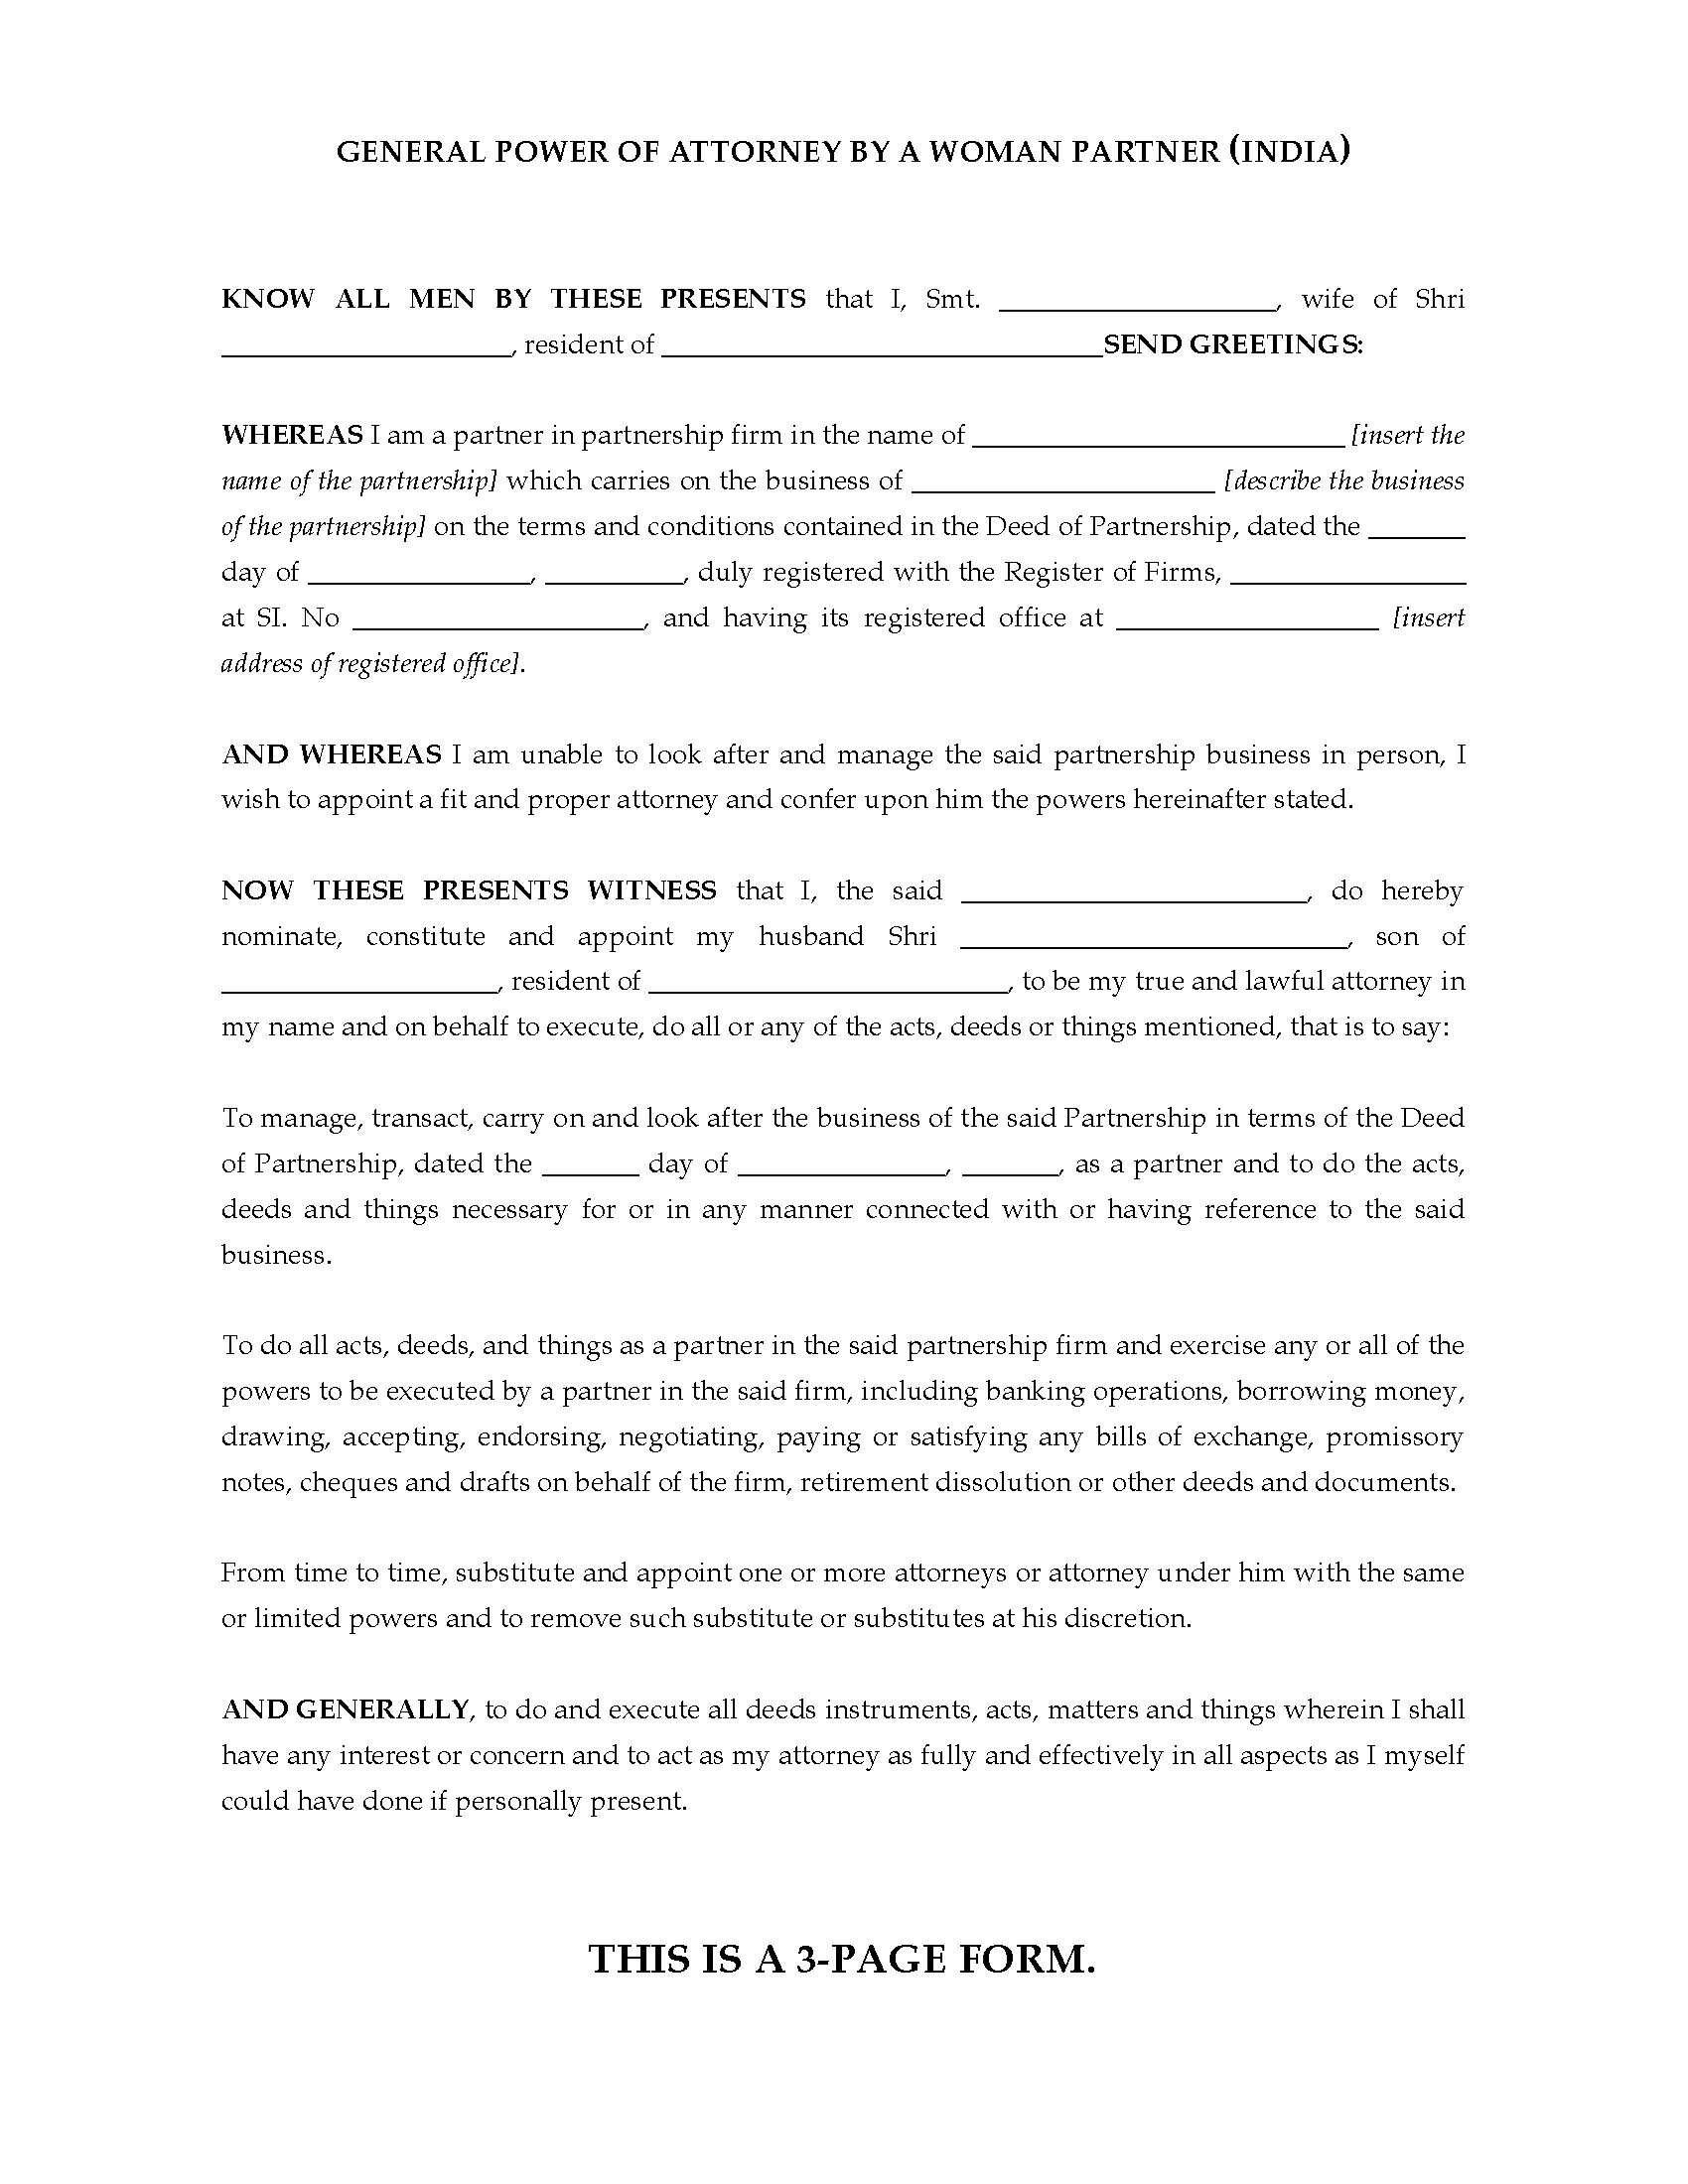 Power Of Attorney Form Templates Lovely 50 Free Power Of Attorney Forms Templates Durable Power Of Attorney Form Power Of Attorney Attorneys